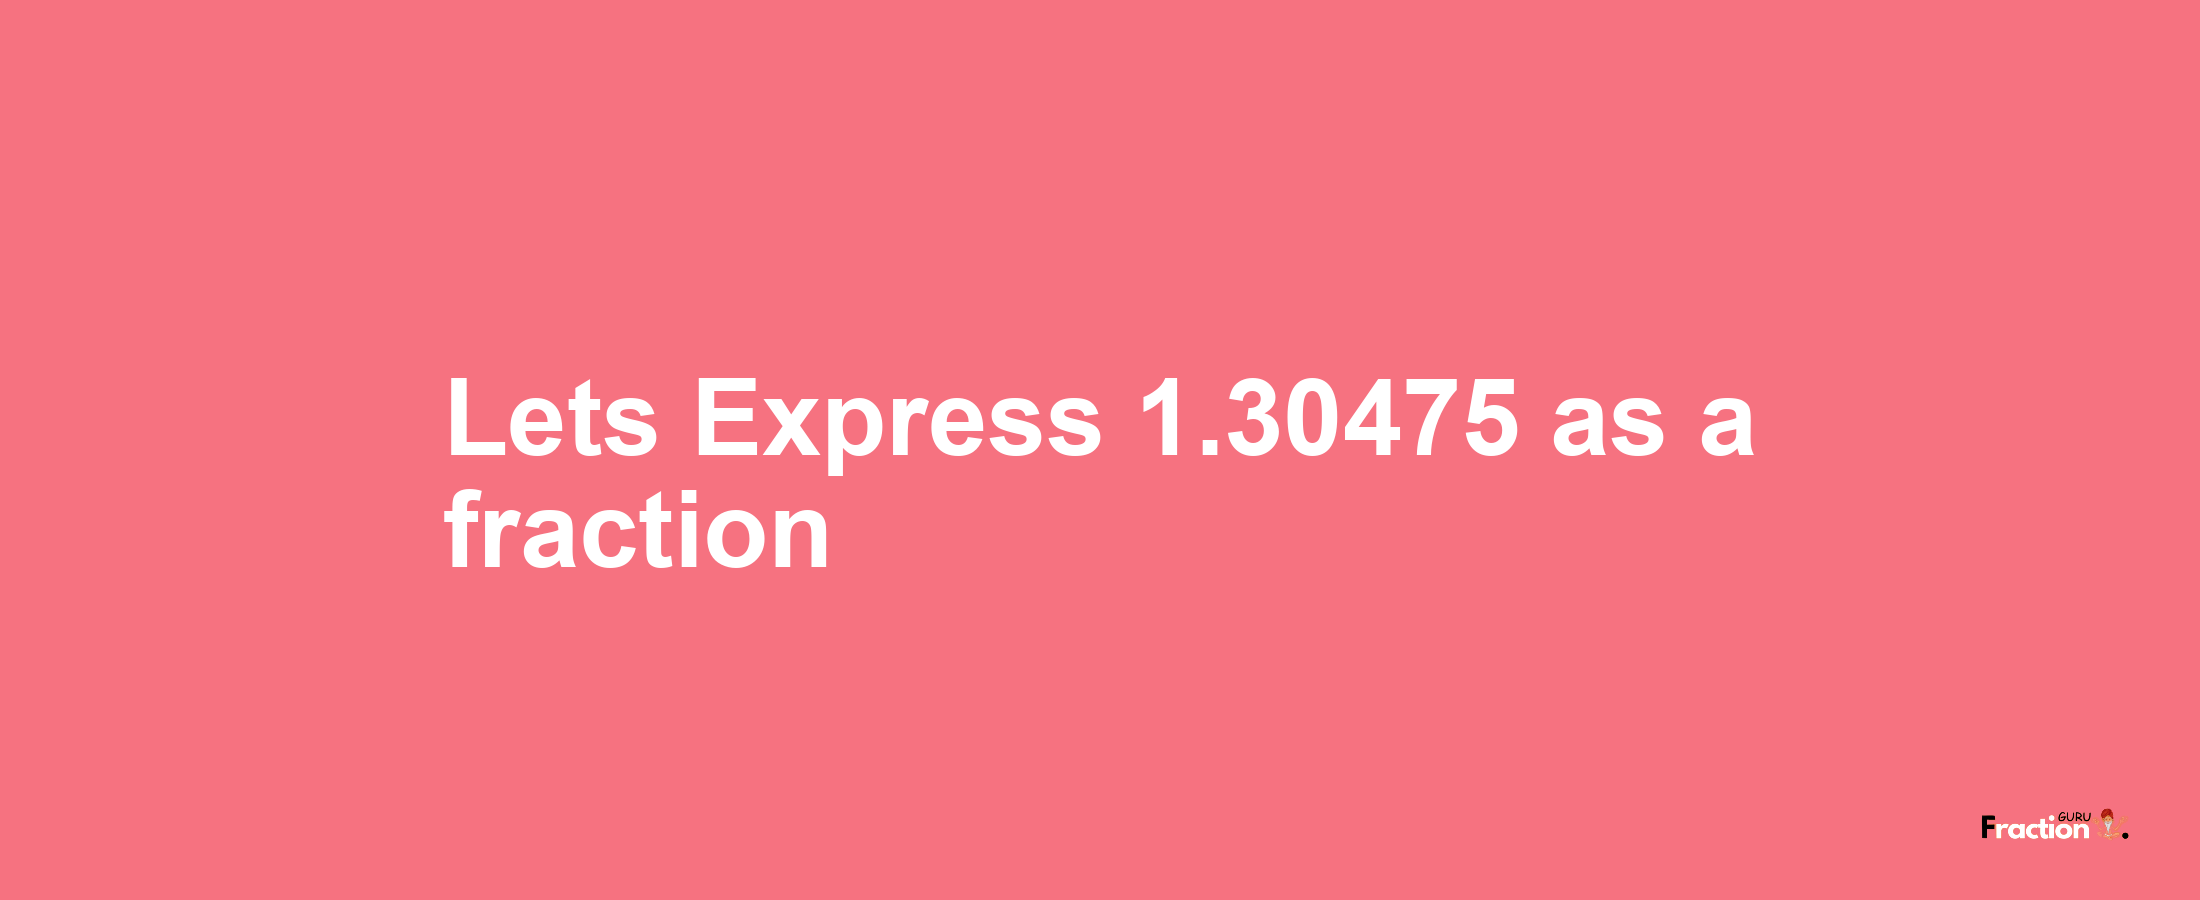 Lets Express 1.30475 as afraction